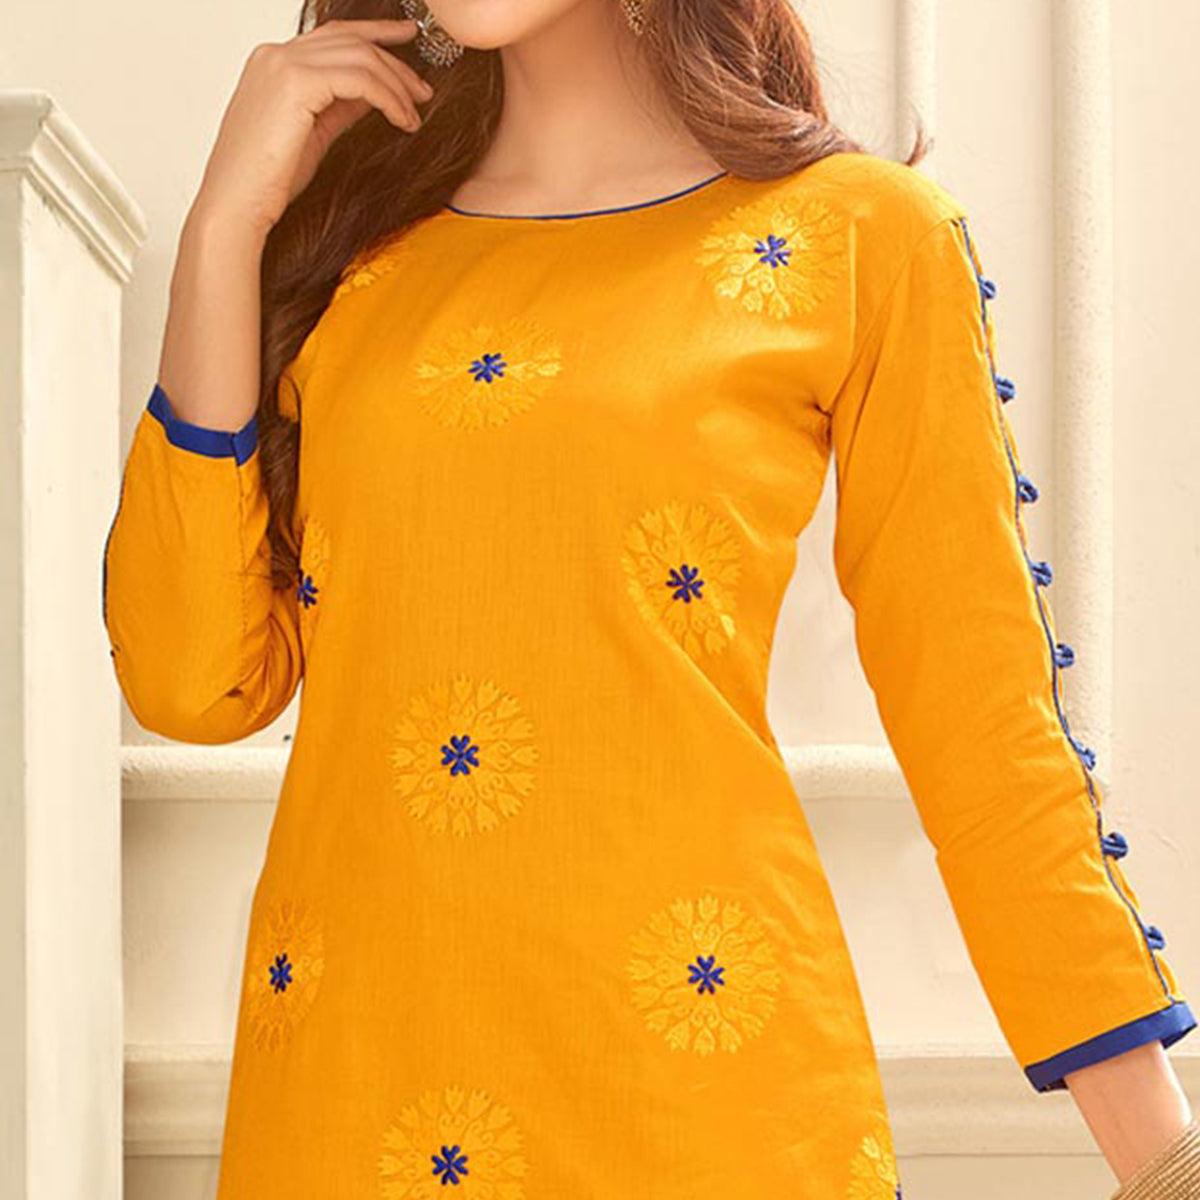 Graceful Yellow Colored Partywear Embroidered Cotton Suit With Pure Banarasi Silk Dupatta - Peachmode